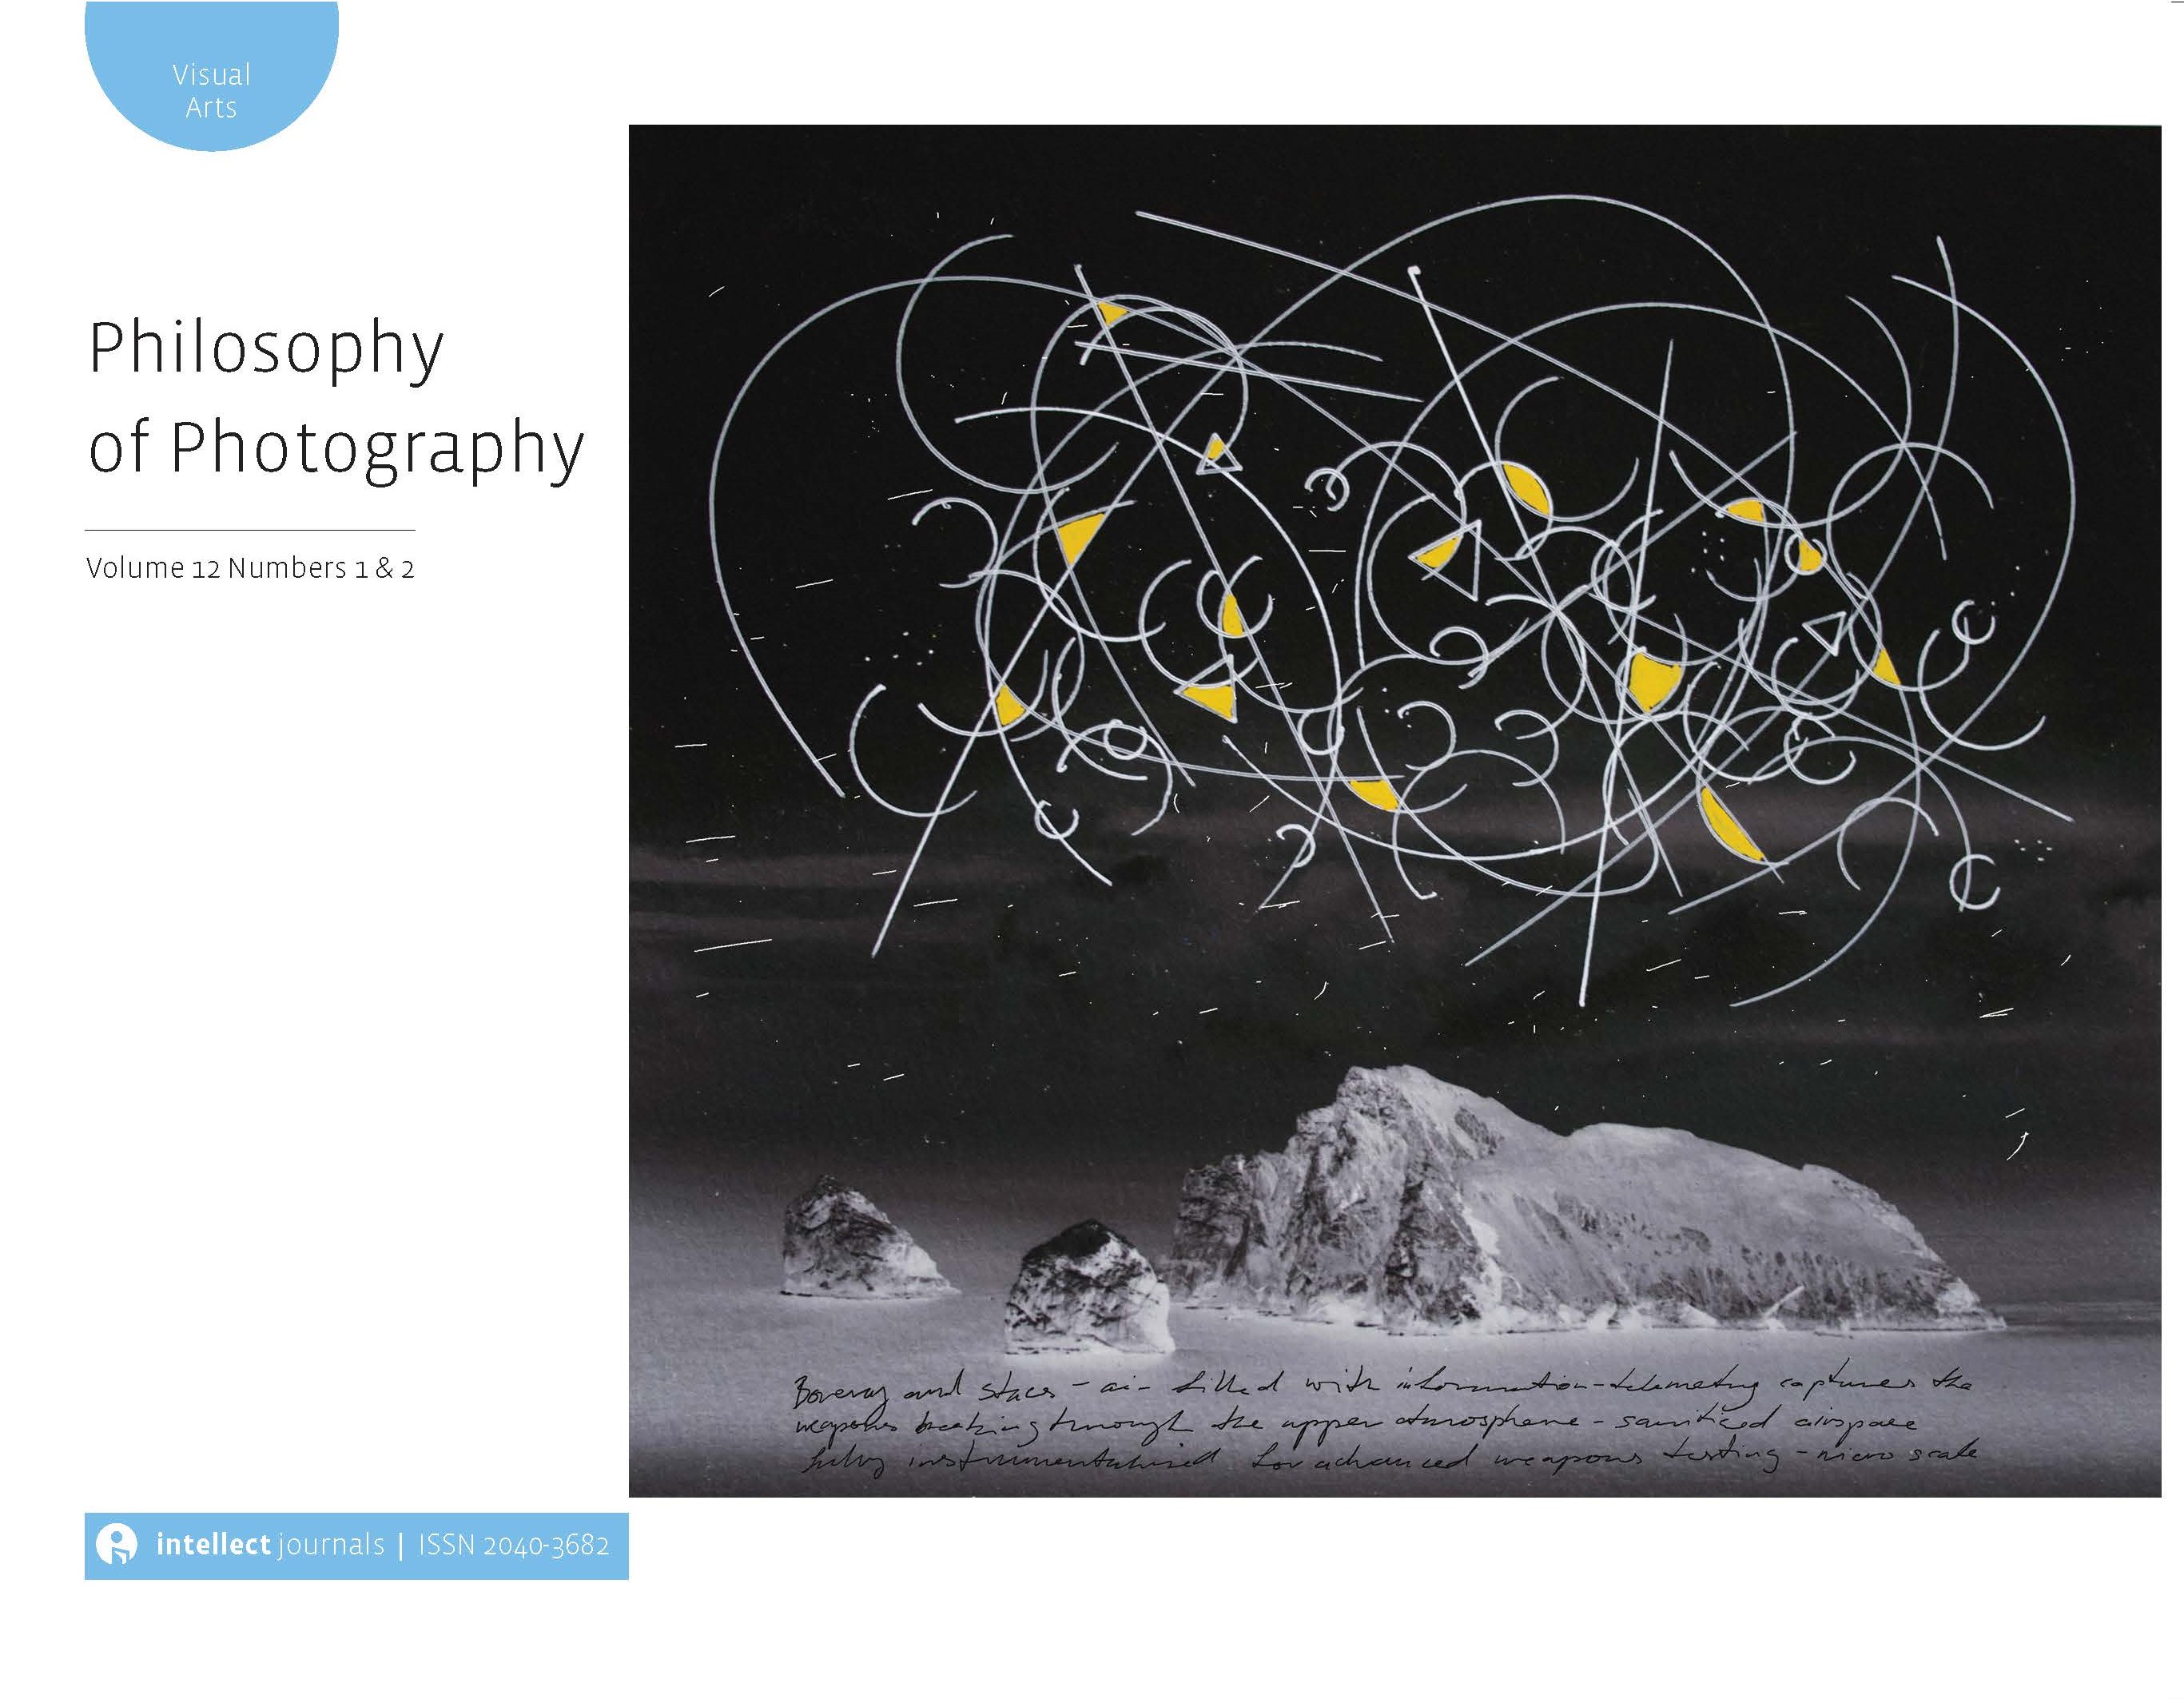 Philosophy of Photography 12.1-2 is out now